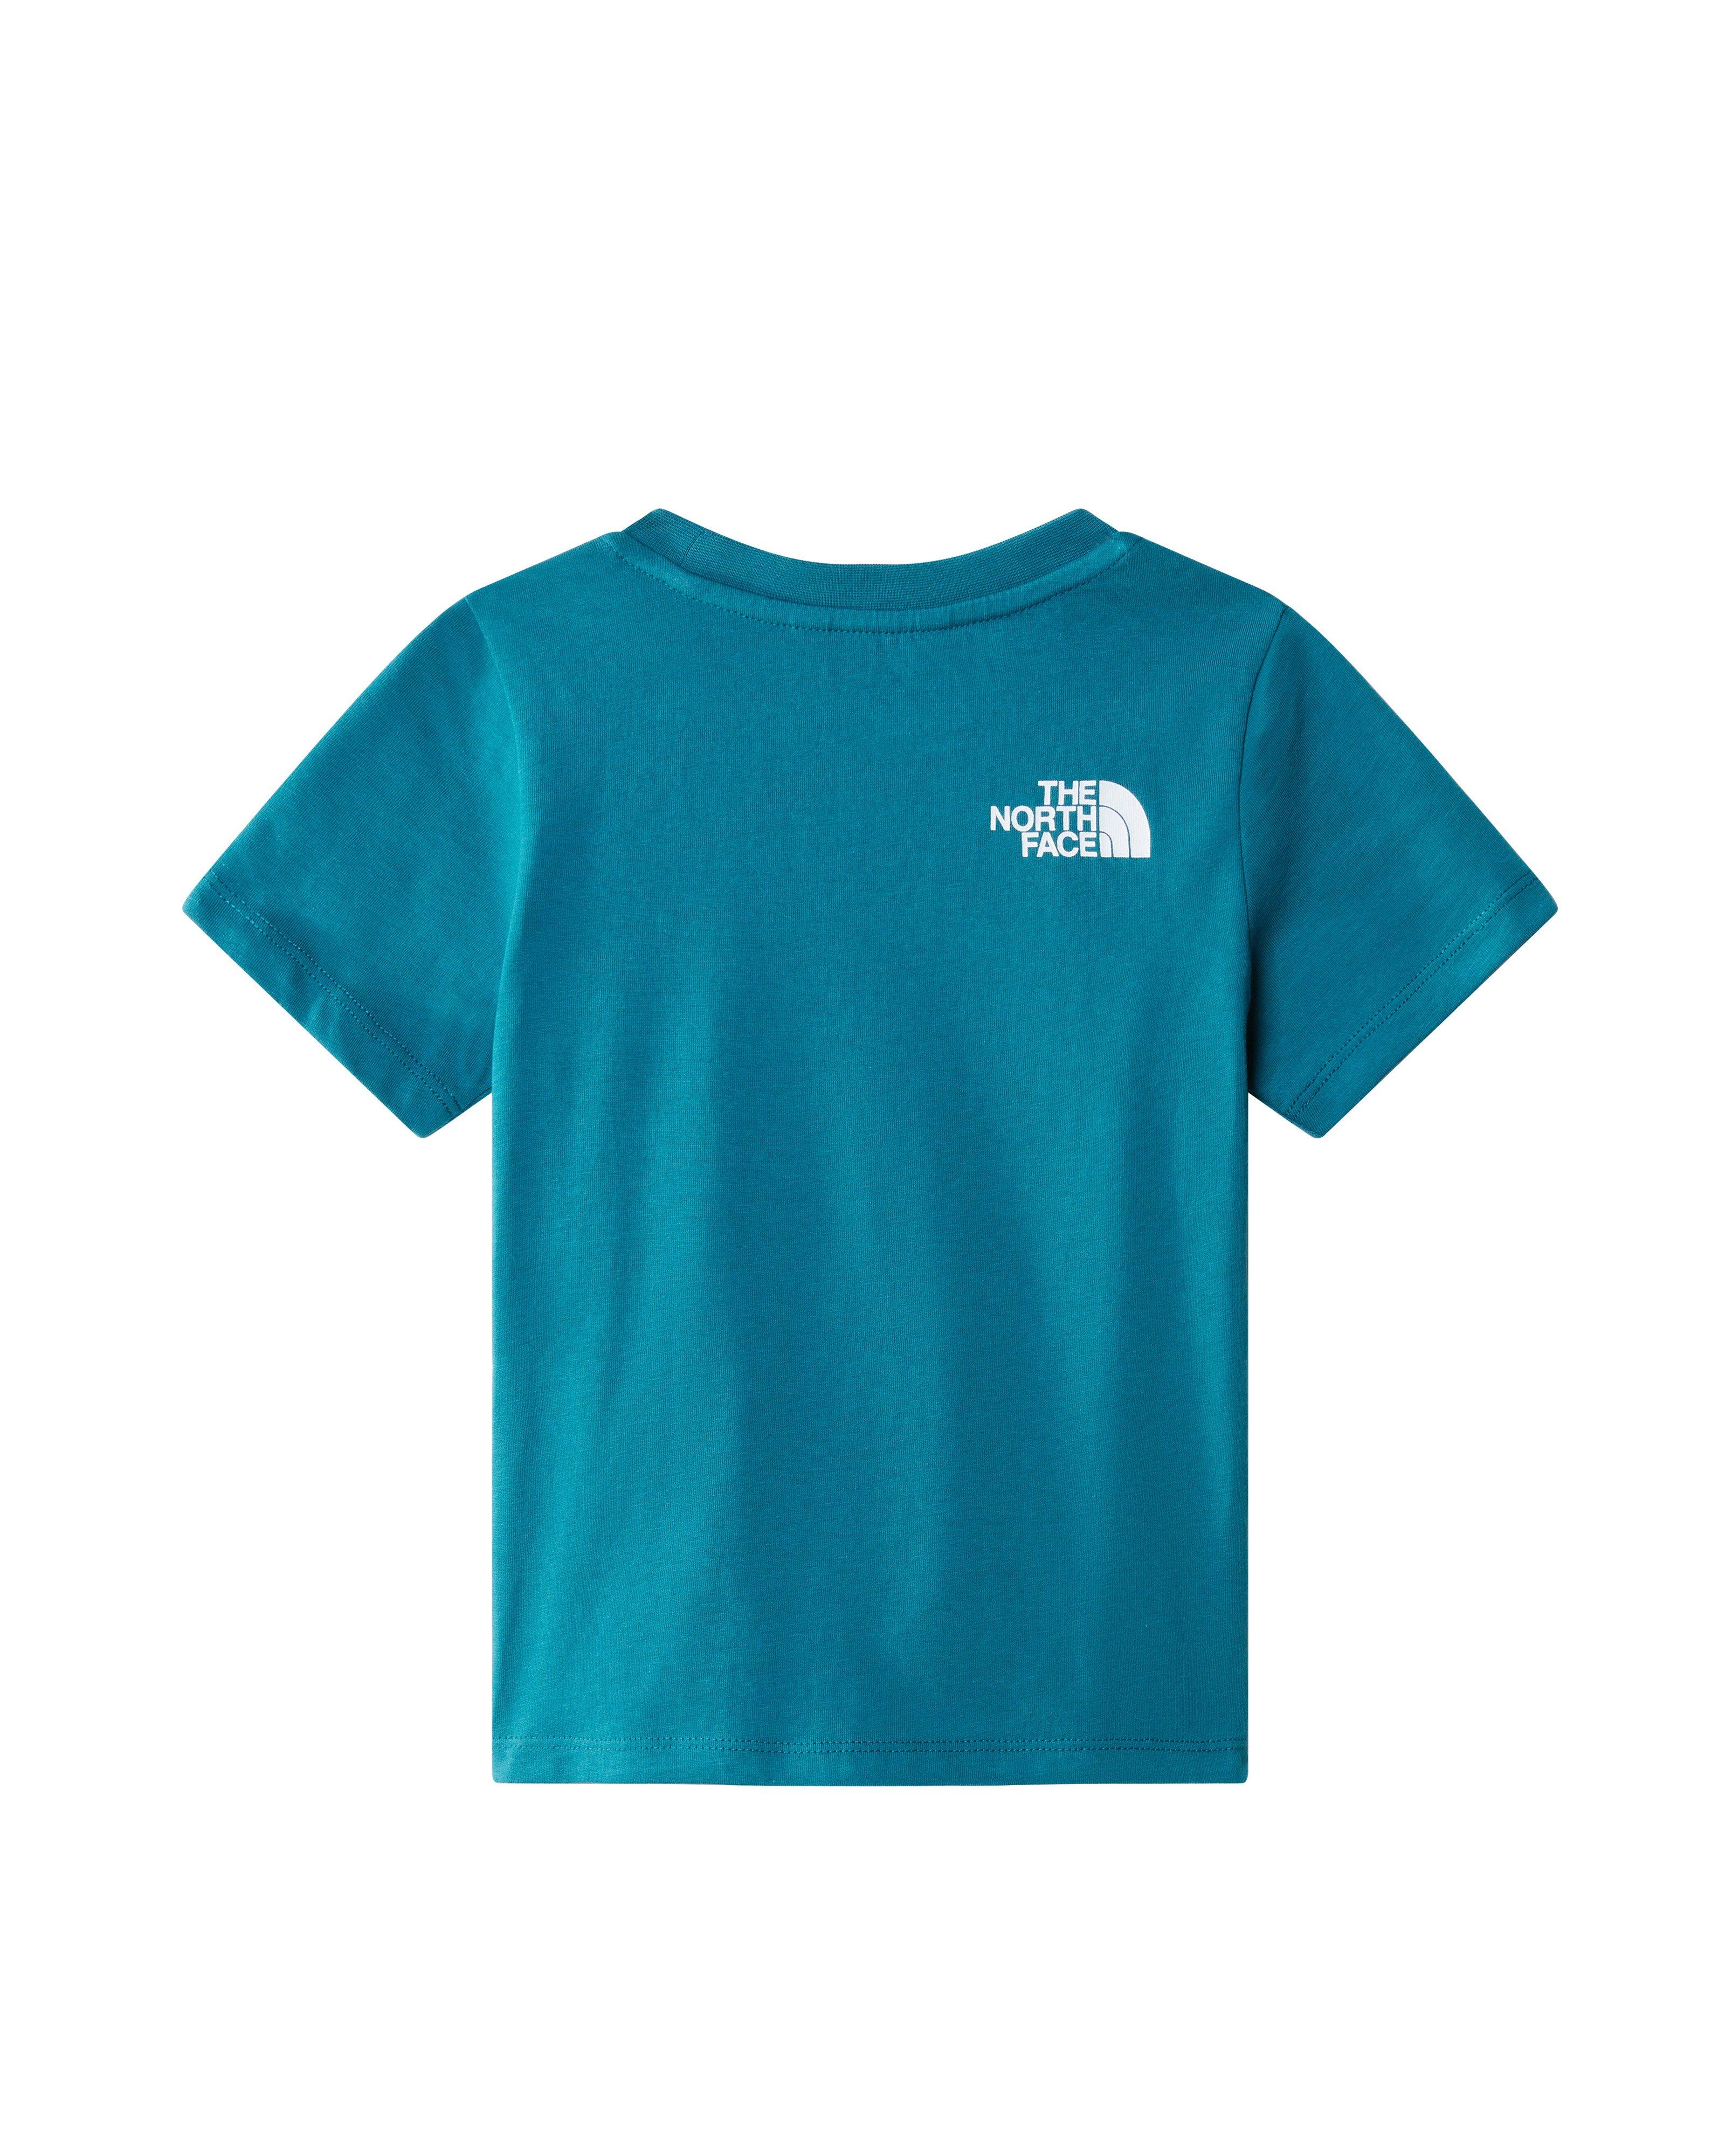 The North Face Kids Outdoor Graphic T-shirt -  Blue